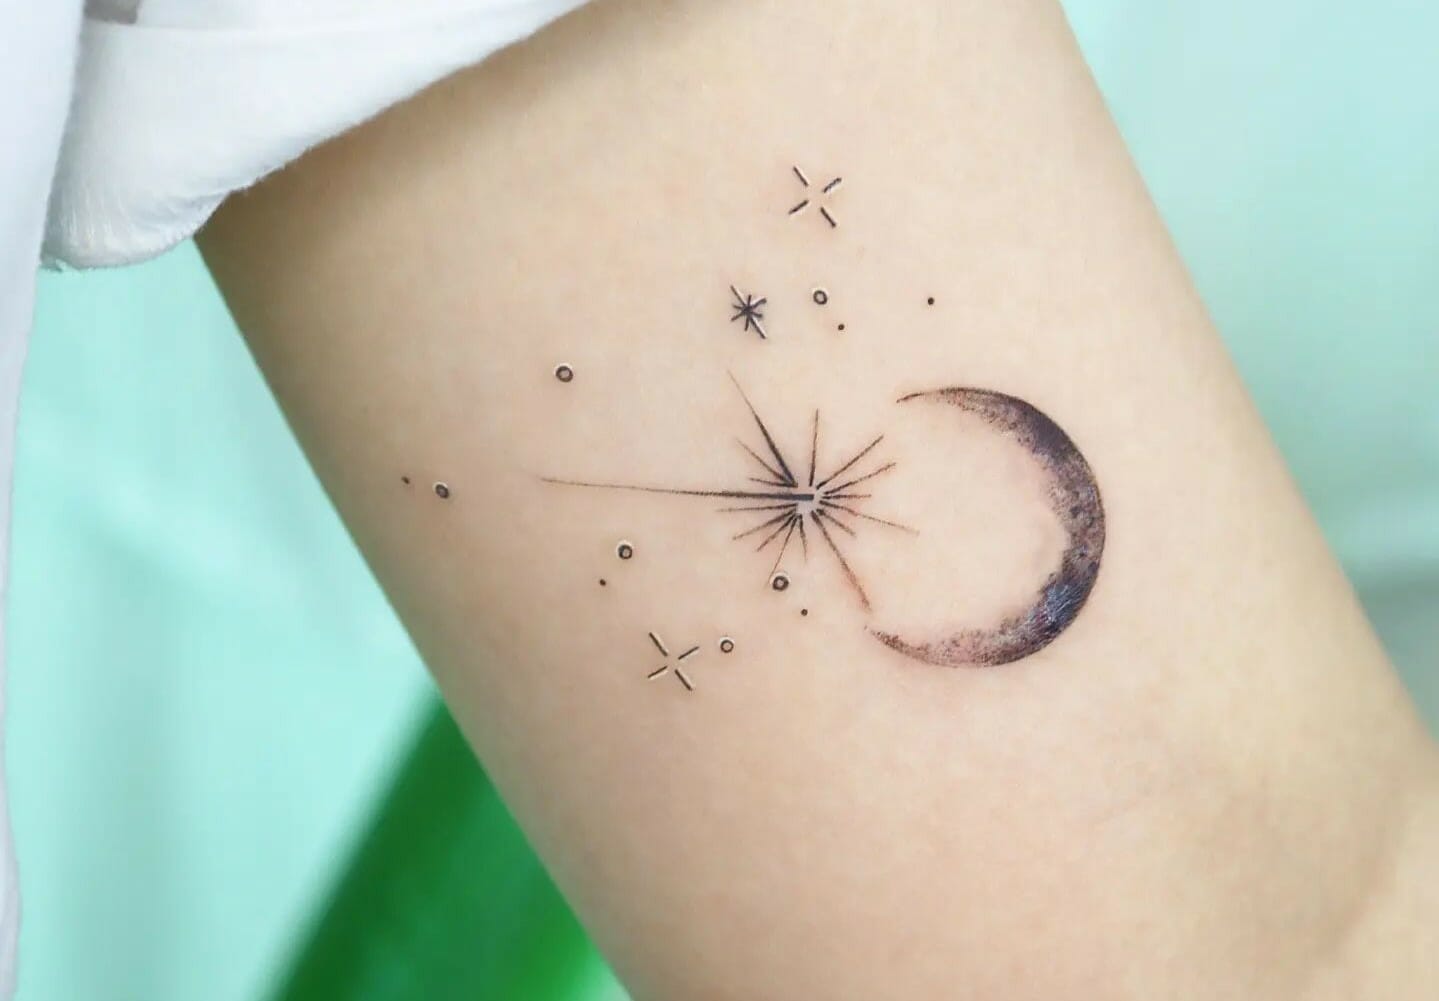 Details 102+ about shooting star tattoo designs super cool -  .vn